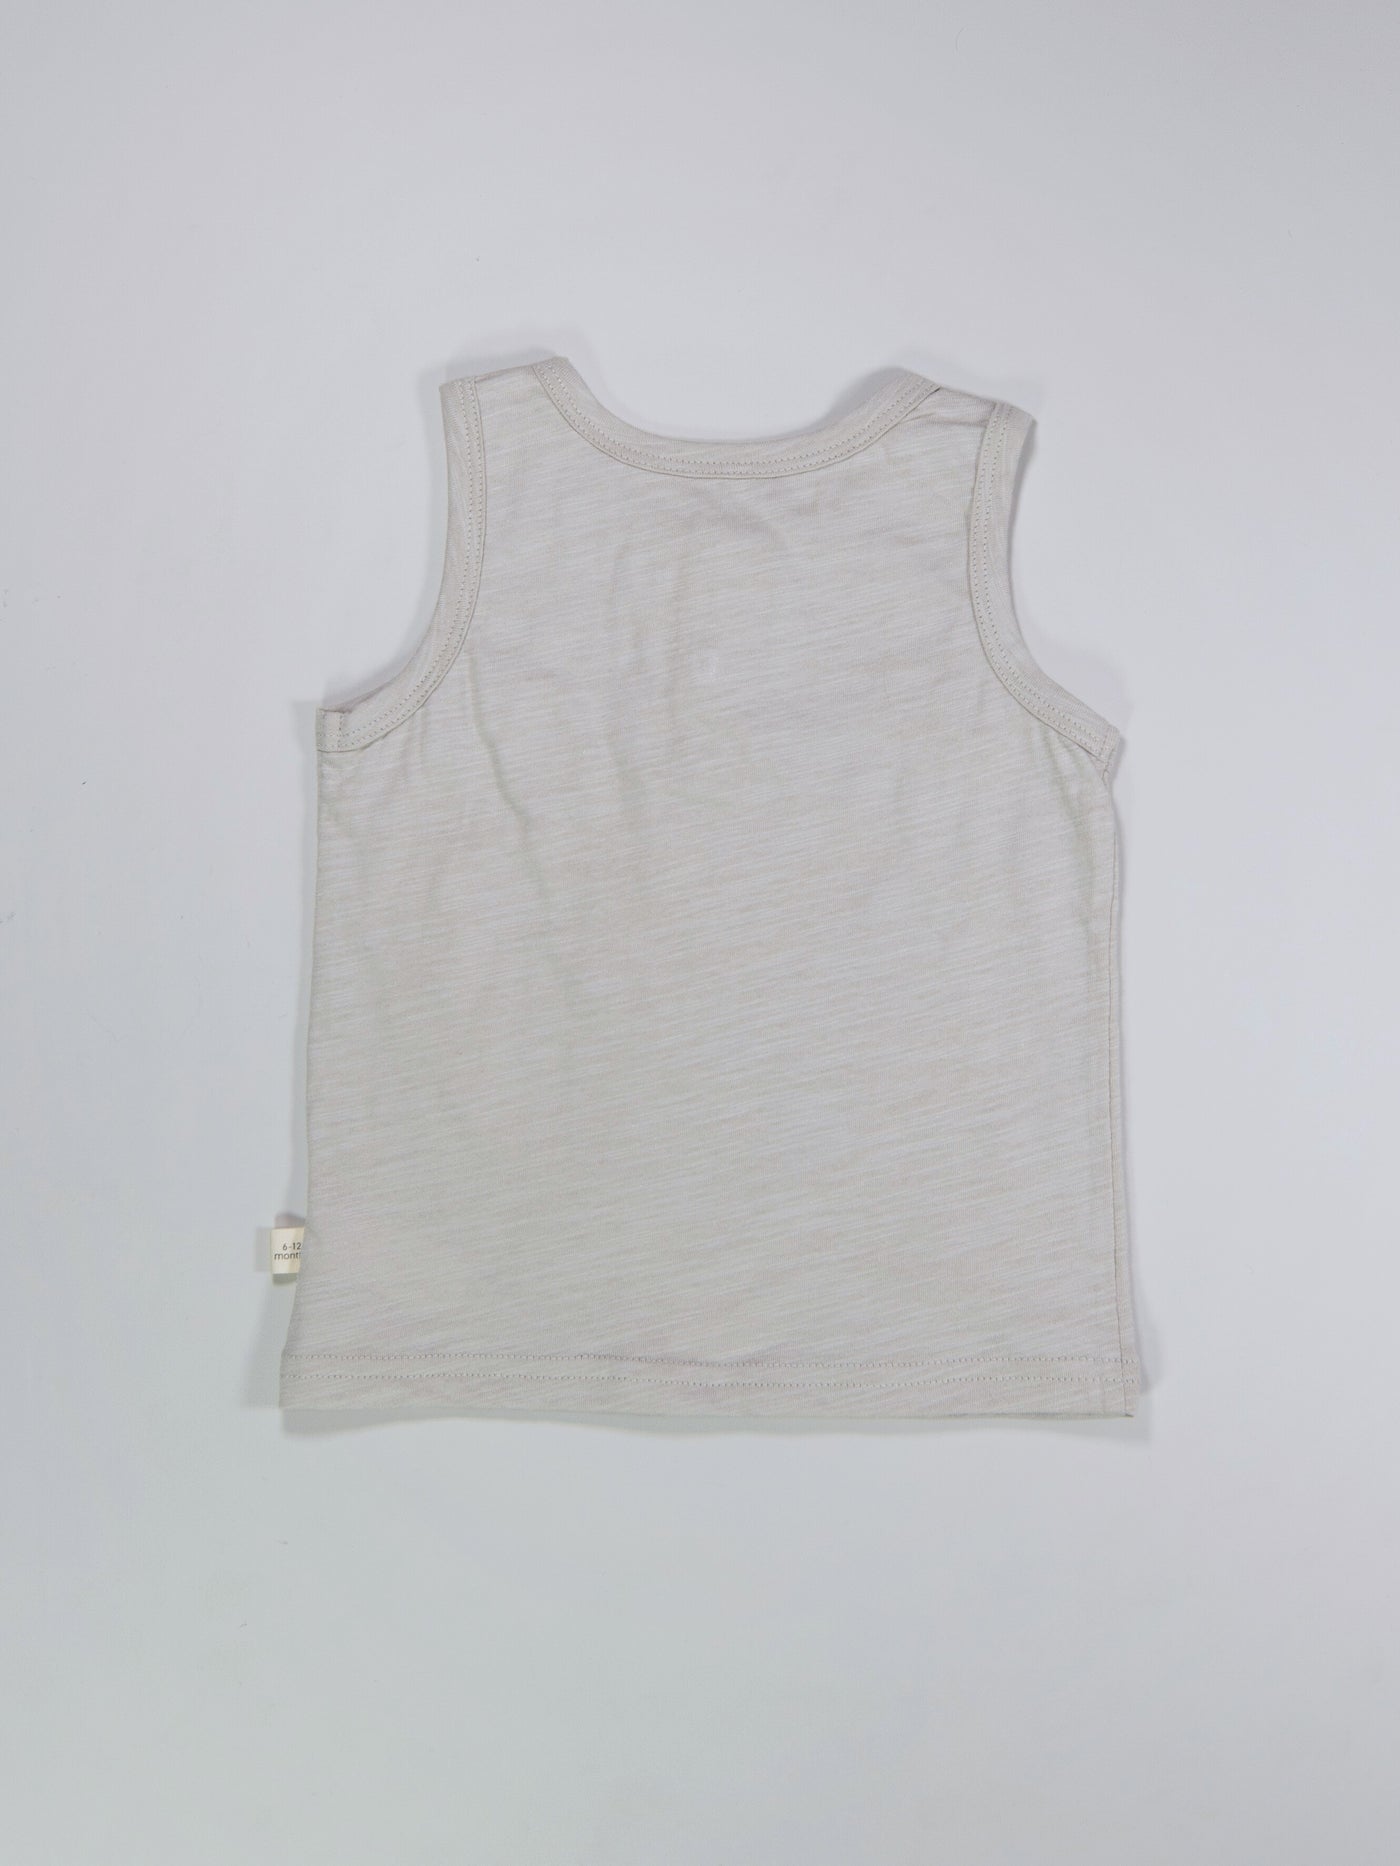 sleeveless singlet for kids, baby and toddlers